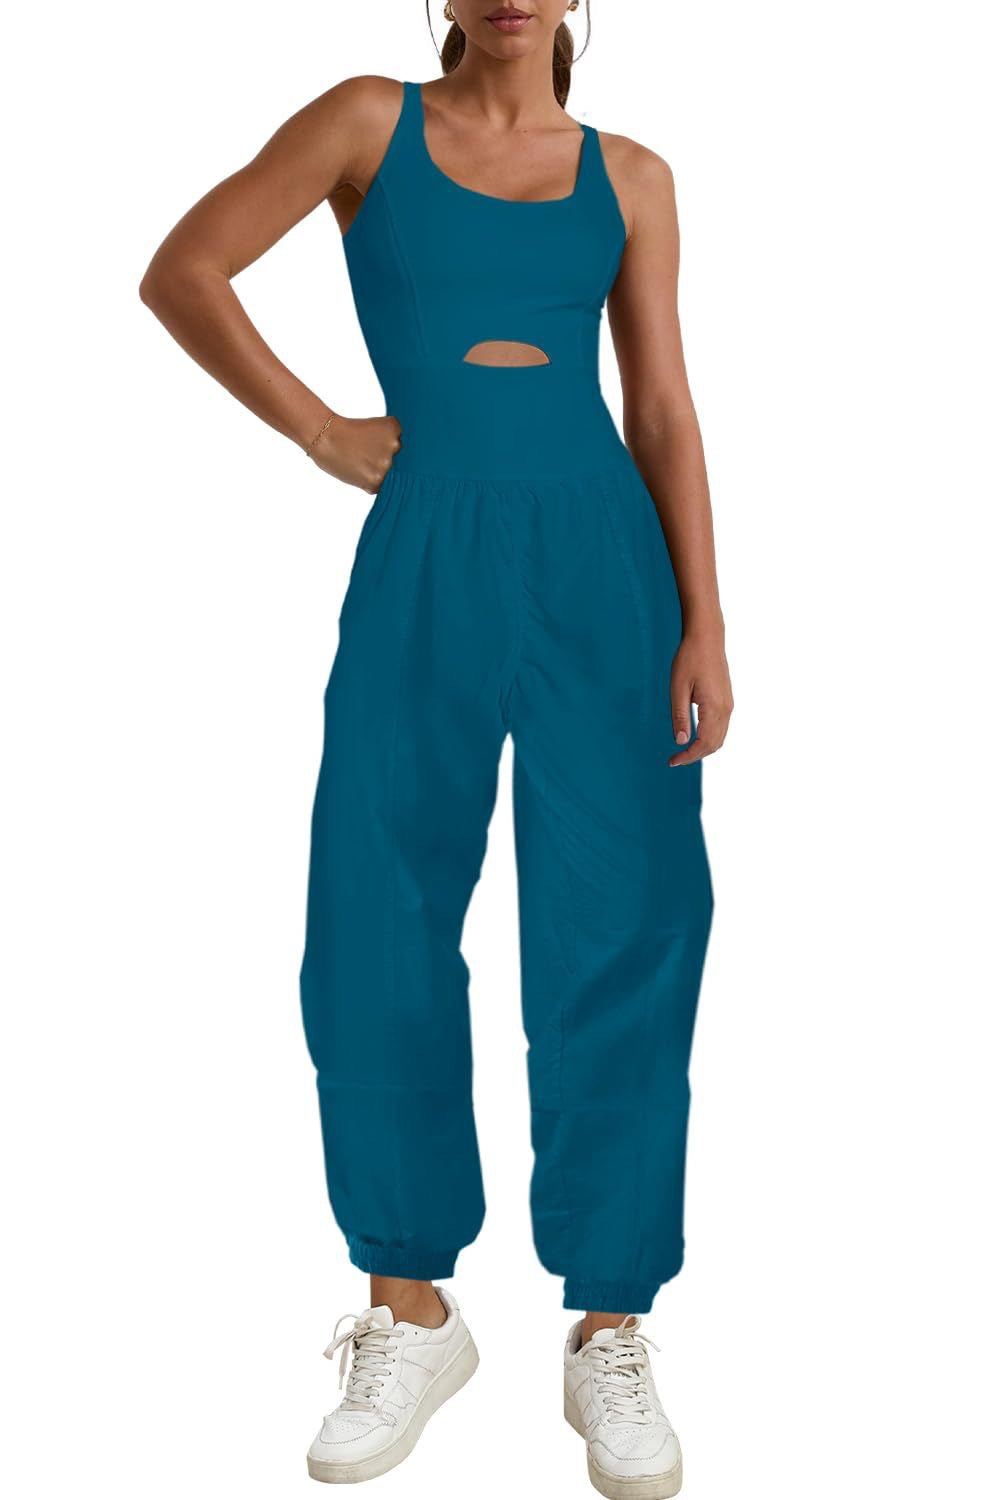 Sleeveless Sports Suit Jumpsuit for Women